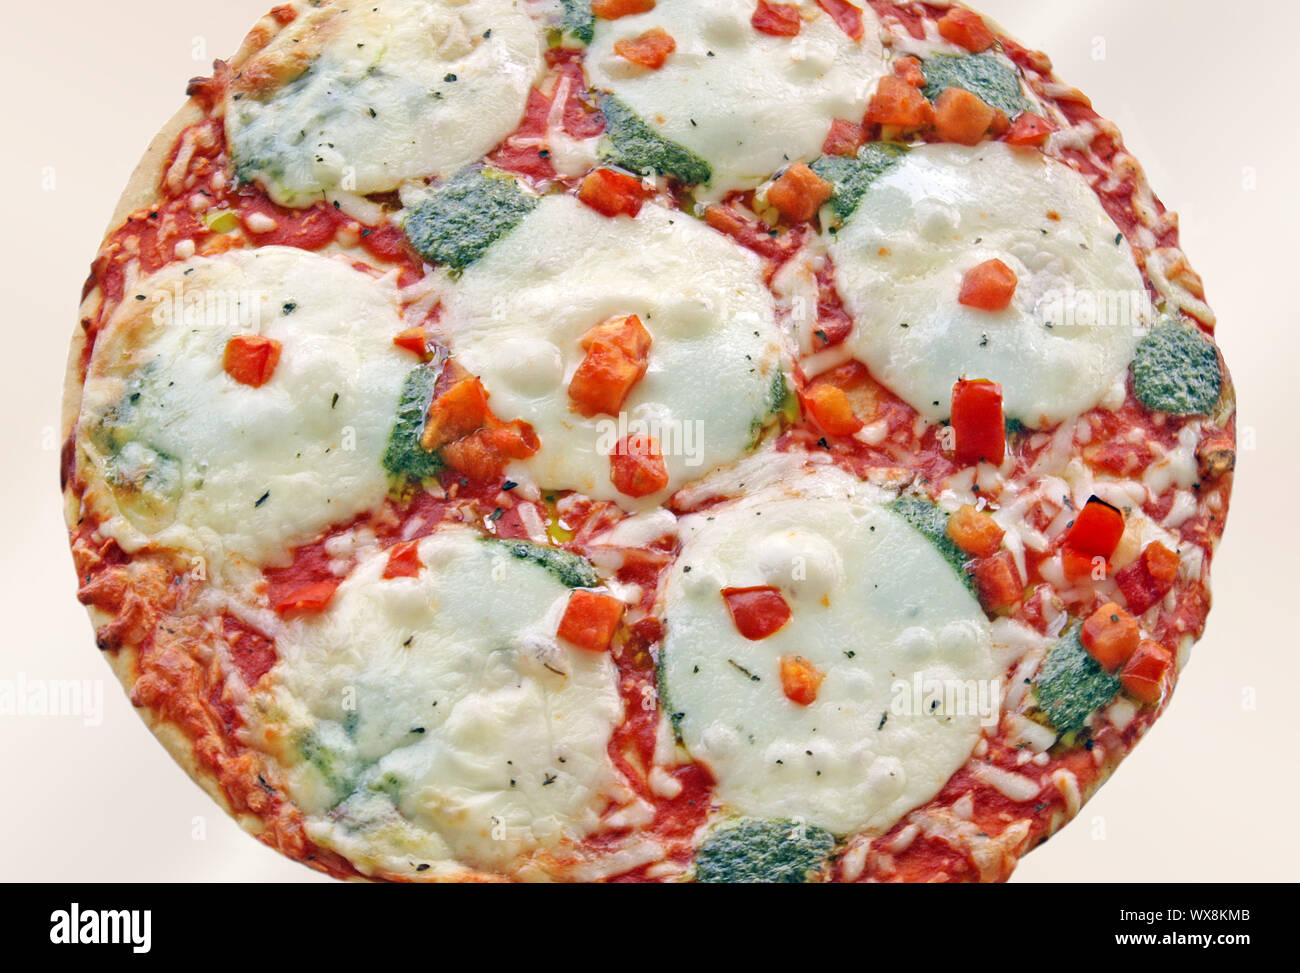 Pizza hot from the oven with melted cheese and veggies.  Isolated on a white background Stock Photo